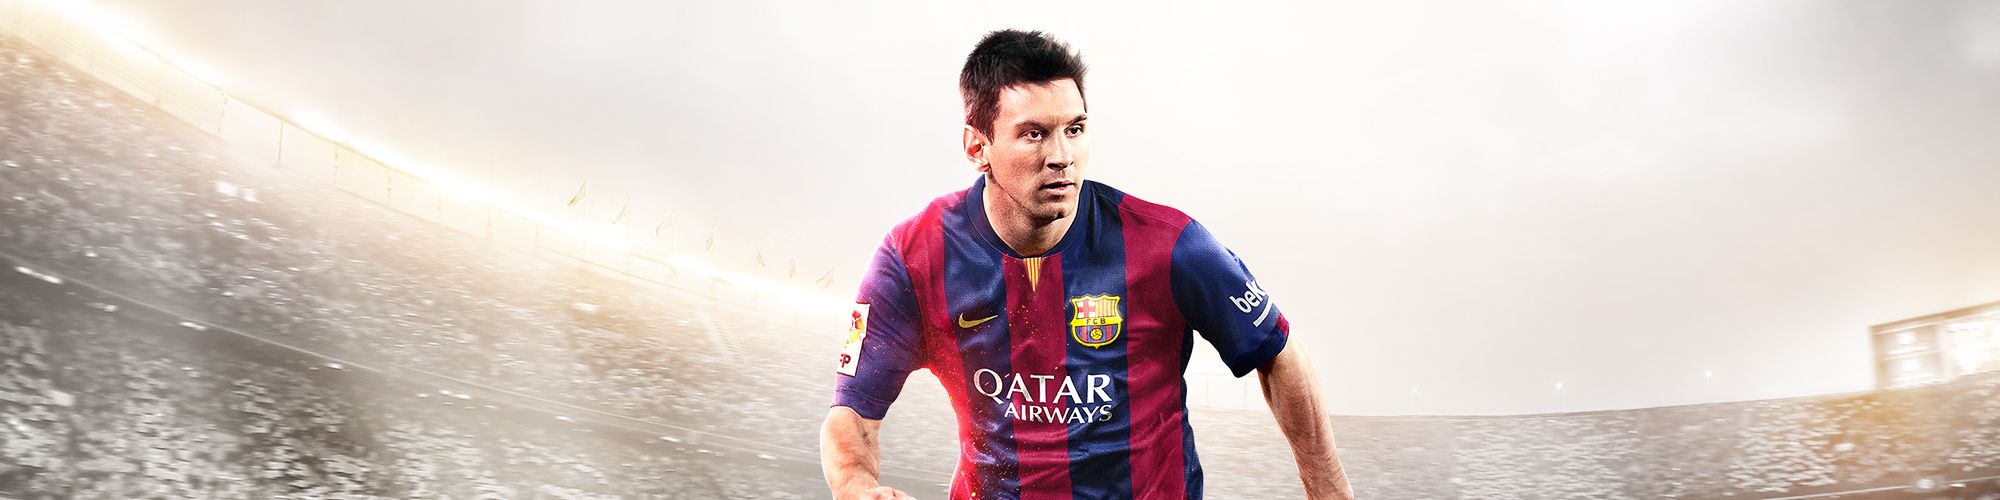 FIFA 15 technical specifications for computer